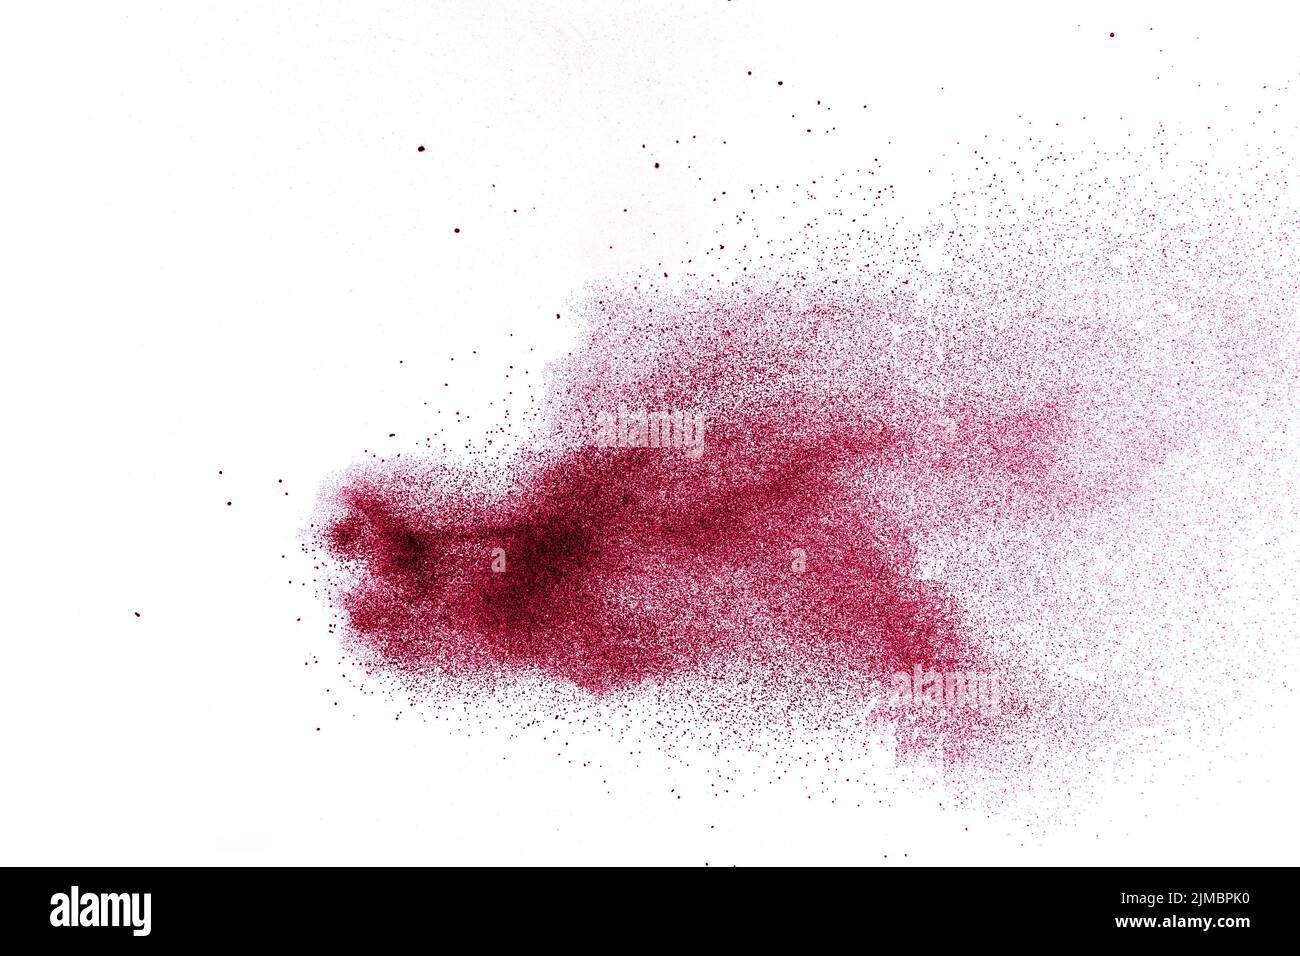 Abstract red dust splattered on white background. Red powder explosion.Freeze motion of red particle Stock Photo